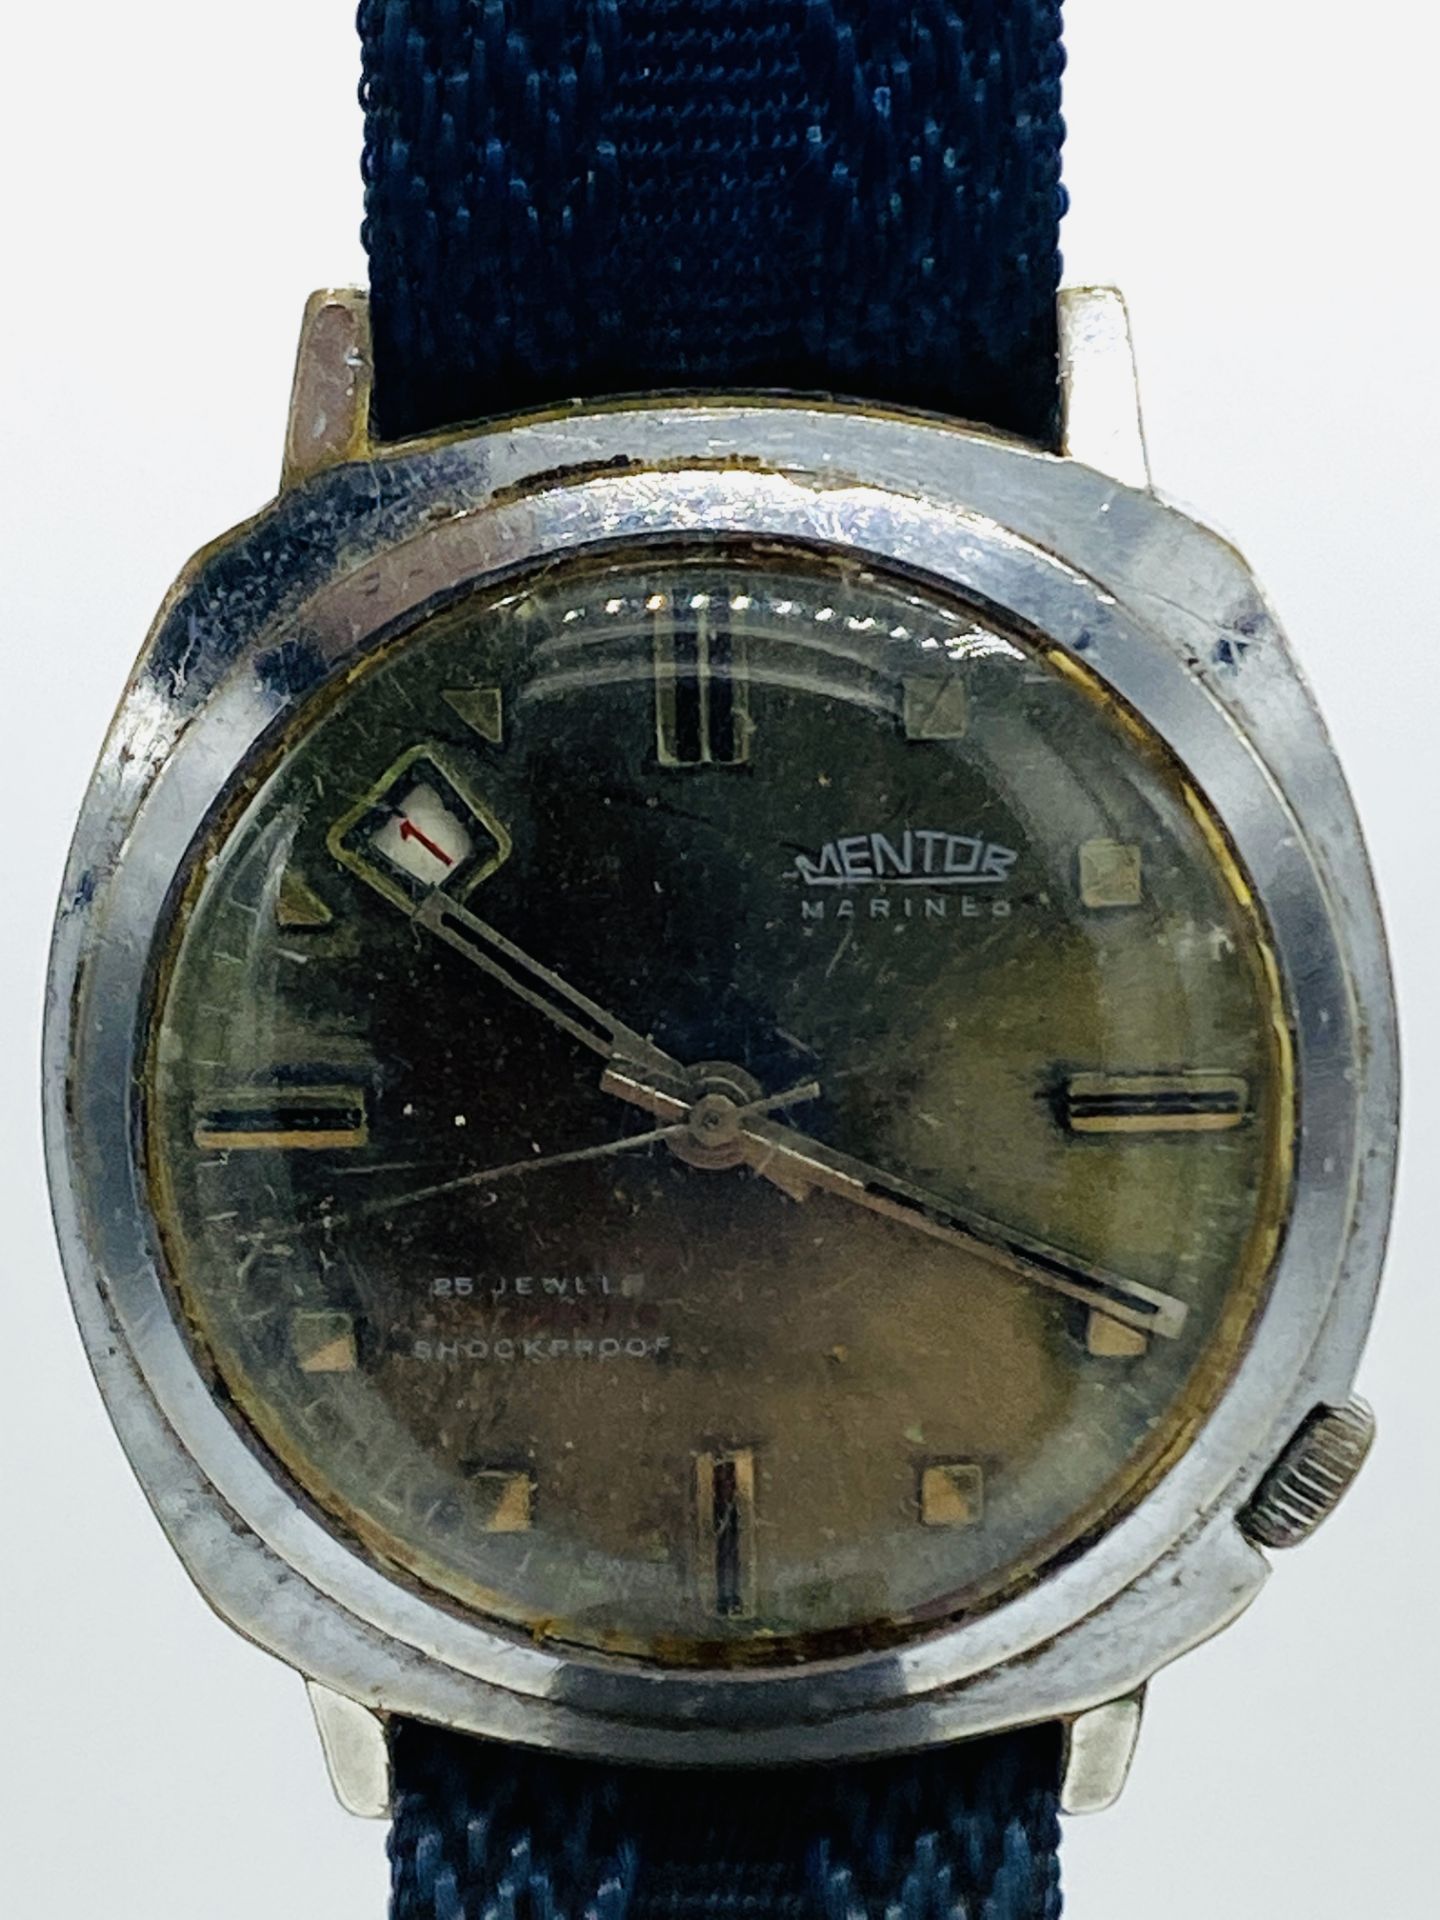 Mentor Marines 25 jewels Automatic wrist watch - Image 2 of 3